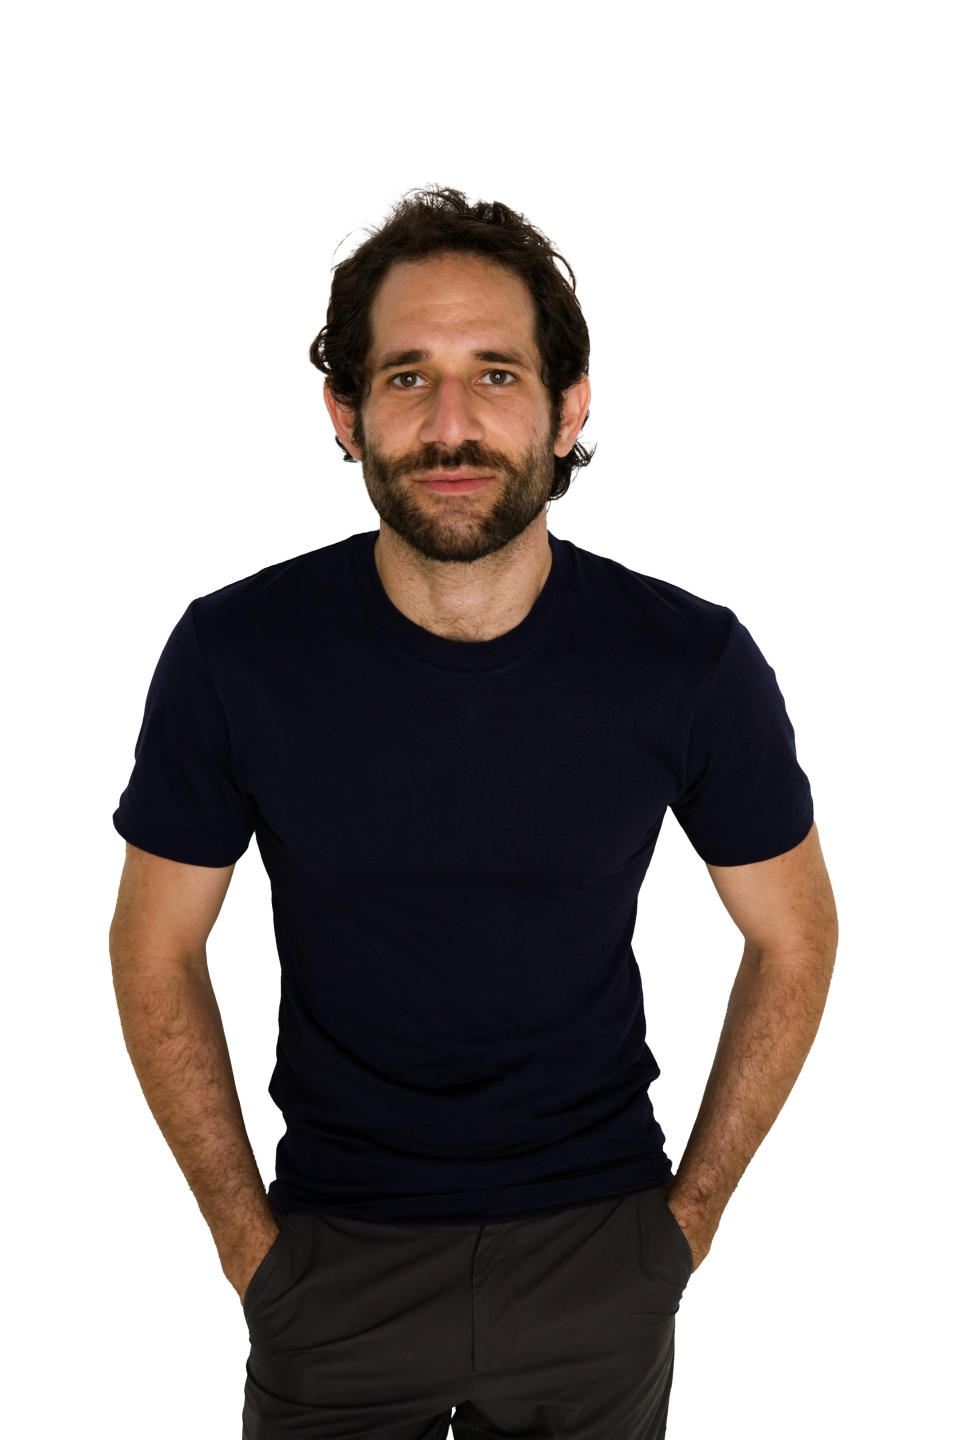 A 2012 lawsuit brought by former employee Michael Bumblis accused CEO Dov Charney of throwing dirt at a store manager and calling him a <a href="http://www.huffingtonpost.com/2012/12/03/american-apparel-lawsuit-dov-charney_n_2232080.html" target="_blank">"fag" and a "wanna be Jew,"</a> The Huffington Post reports. "Dov Charney and witnesses deny that Charney ever assaulted or rubbed dirt in Mr. Bumblis's face," spokesman Peter Schey told HuffPost. "Mr. Bumblis sued only after being terminated for cause (after numerous warnings about his conduct before and after the alleged dirt-throwing incident)."